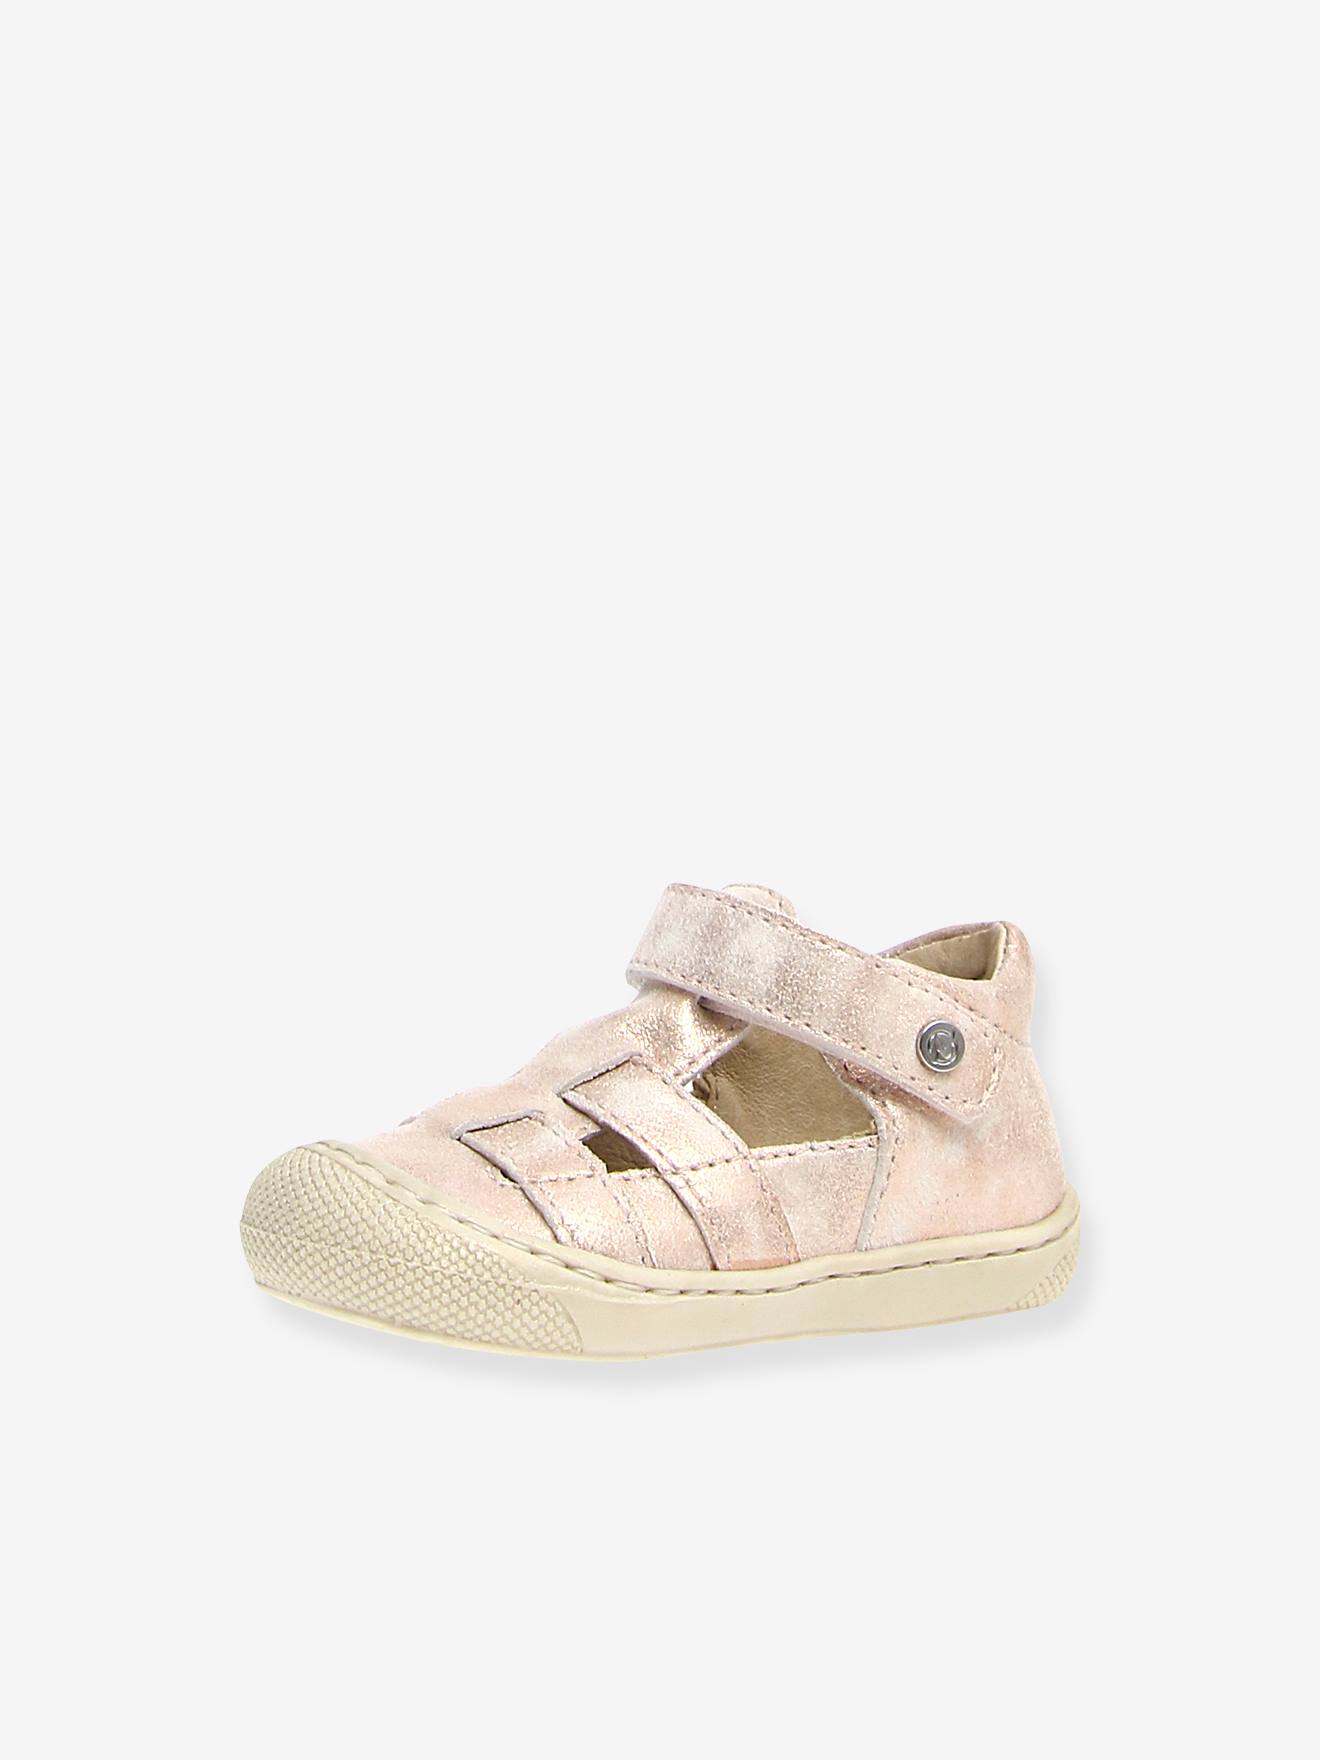 High-Top Sandals for Babies by (r) rose